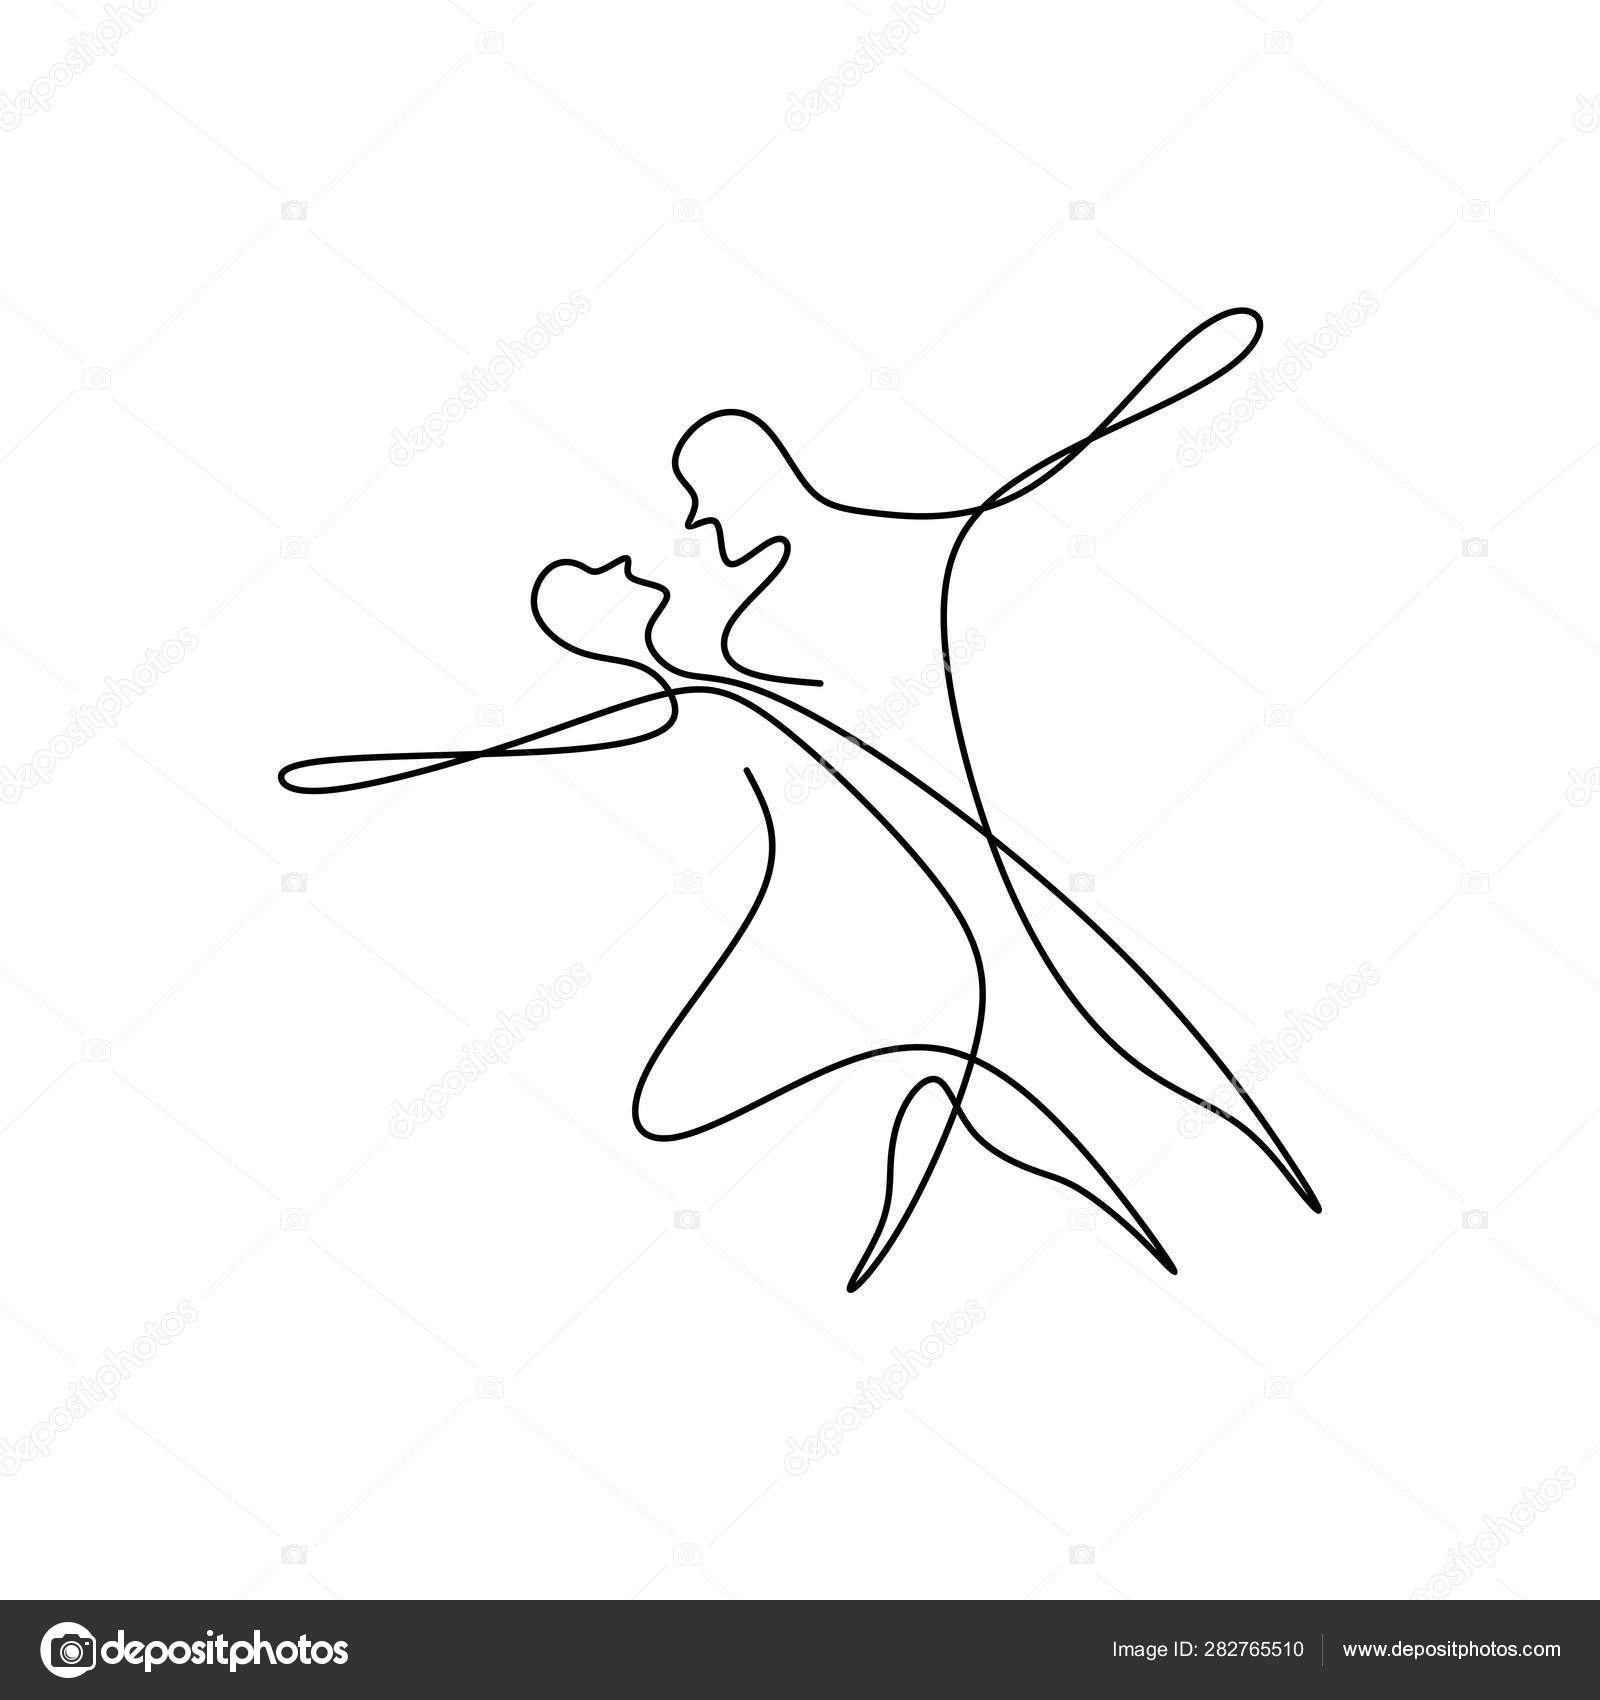 1,608 Valentine Couples Dancing Drawing Images, Stock Photos, 3D objects, &  Vectors | Shutterstock